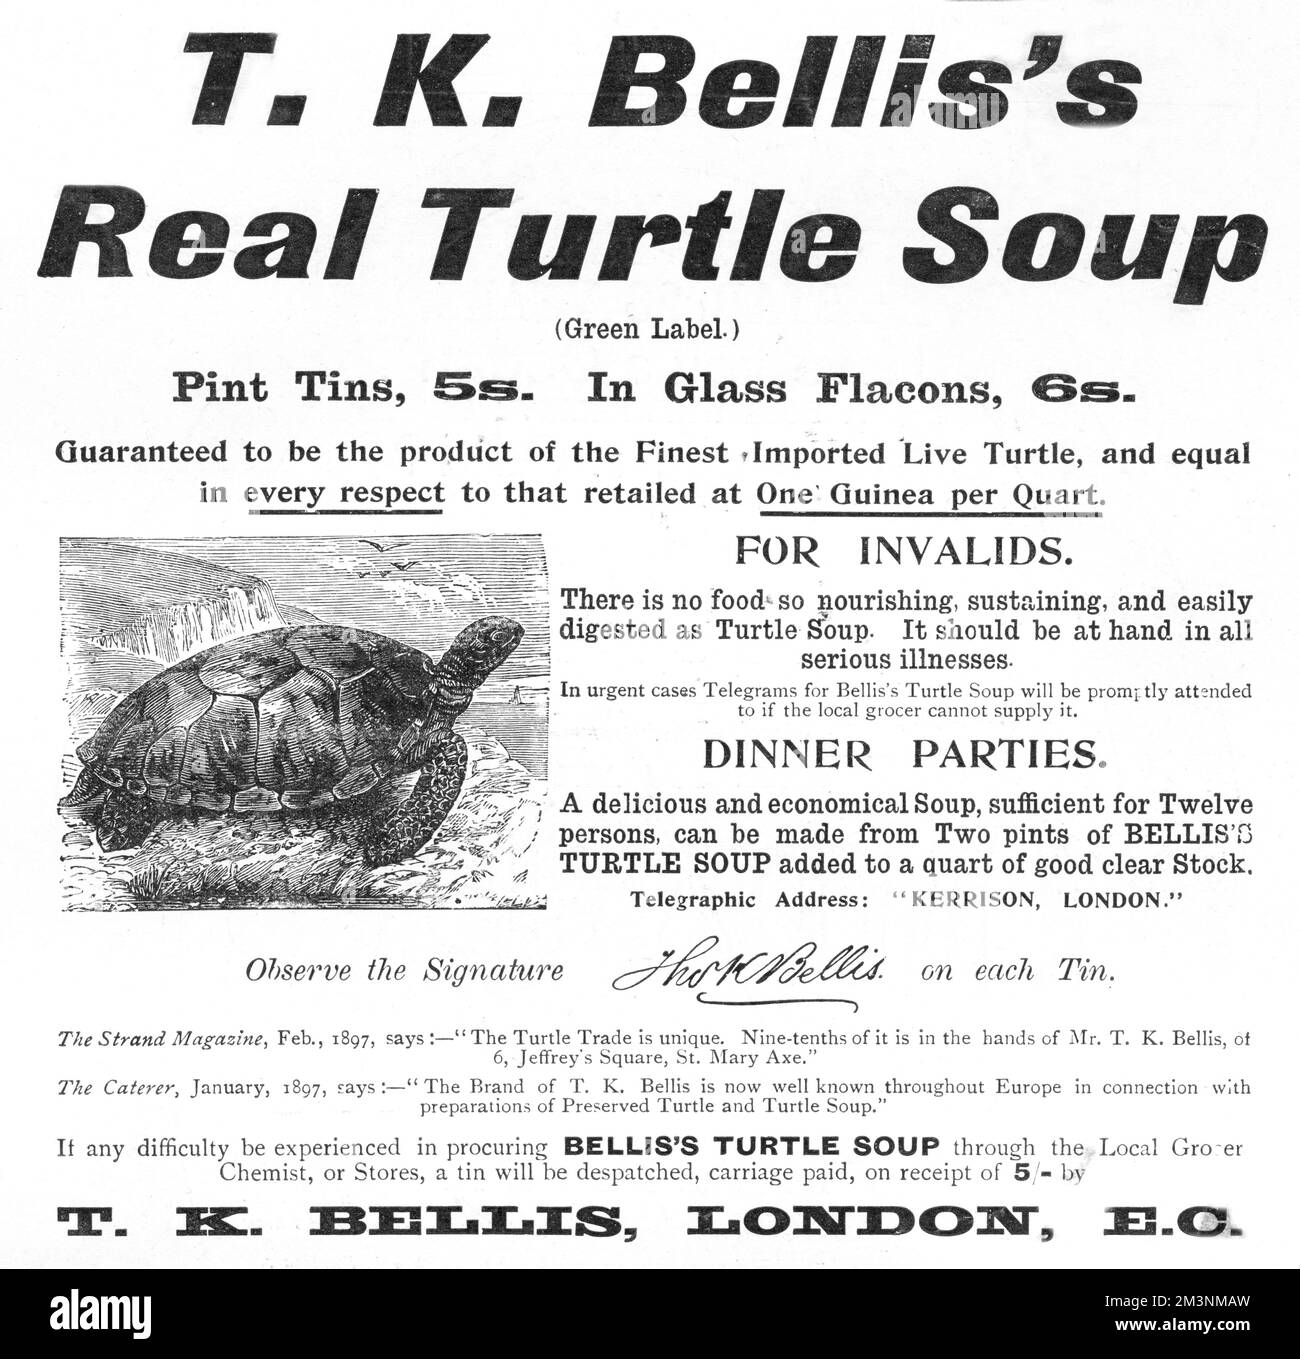 T.K Bellis's Real Turtle Soup. Guarenteed to be the product of the Finest Imported Live Turtle. Delicious and economical, nourishing, sustaining and easily digested, it is perfect for dinner parties and invalids.  A cheaper alternative to this(not advertised here) was mock turtle soup, which was made from a calf's head.     Date: 1898 Stock Photo